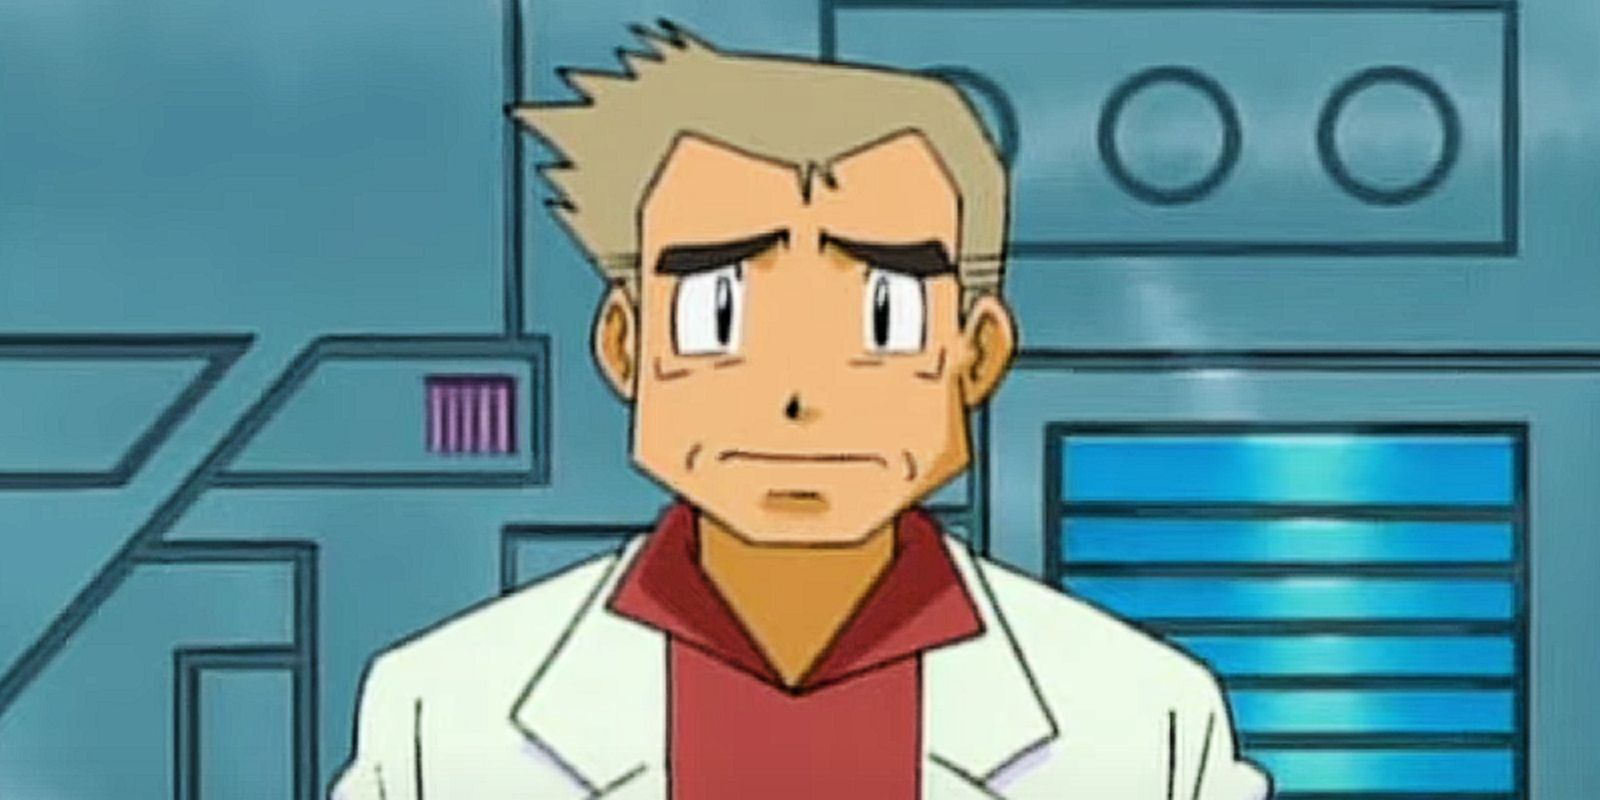 Professor Oak claims he invented the Pokedex, but it's been around since Ancient Hisui in Pokemon Legends: Arceus.